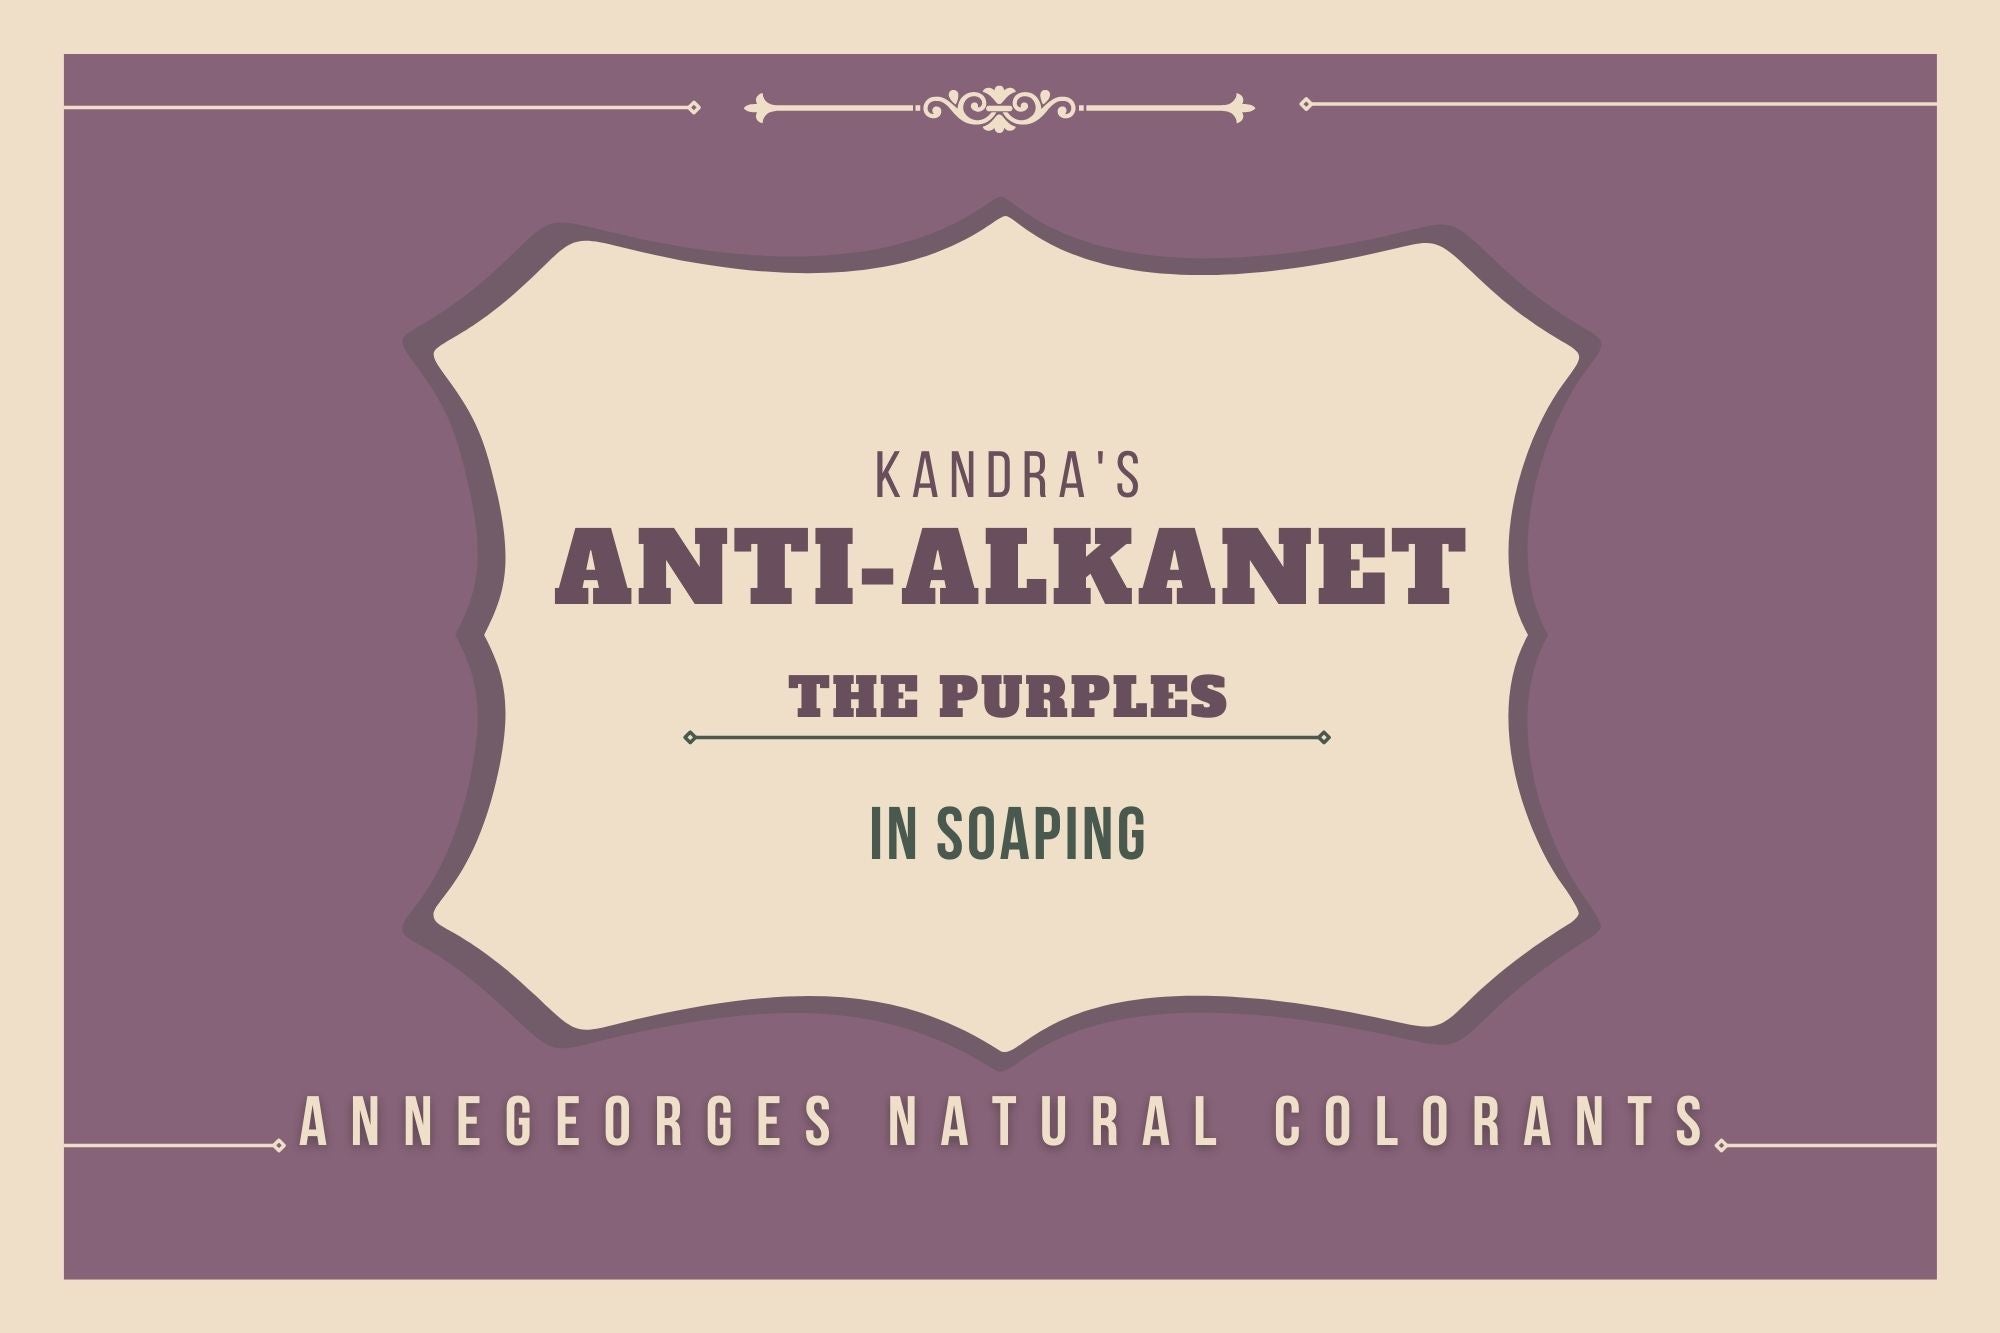 Anti-Alkanet The Purples is a set of natural colorants that make Purples in  soaping. As seen in Kandra Churchwell's The Natural Soap Color Palette.